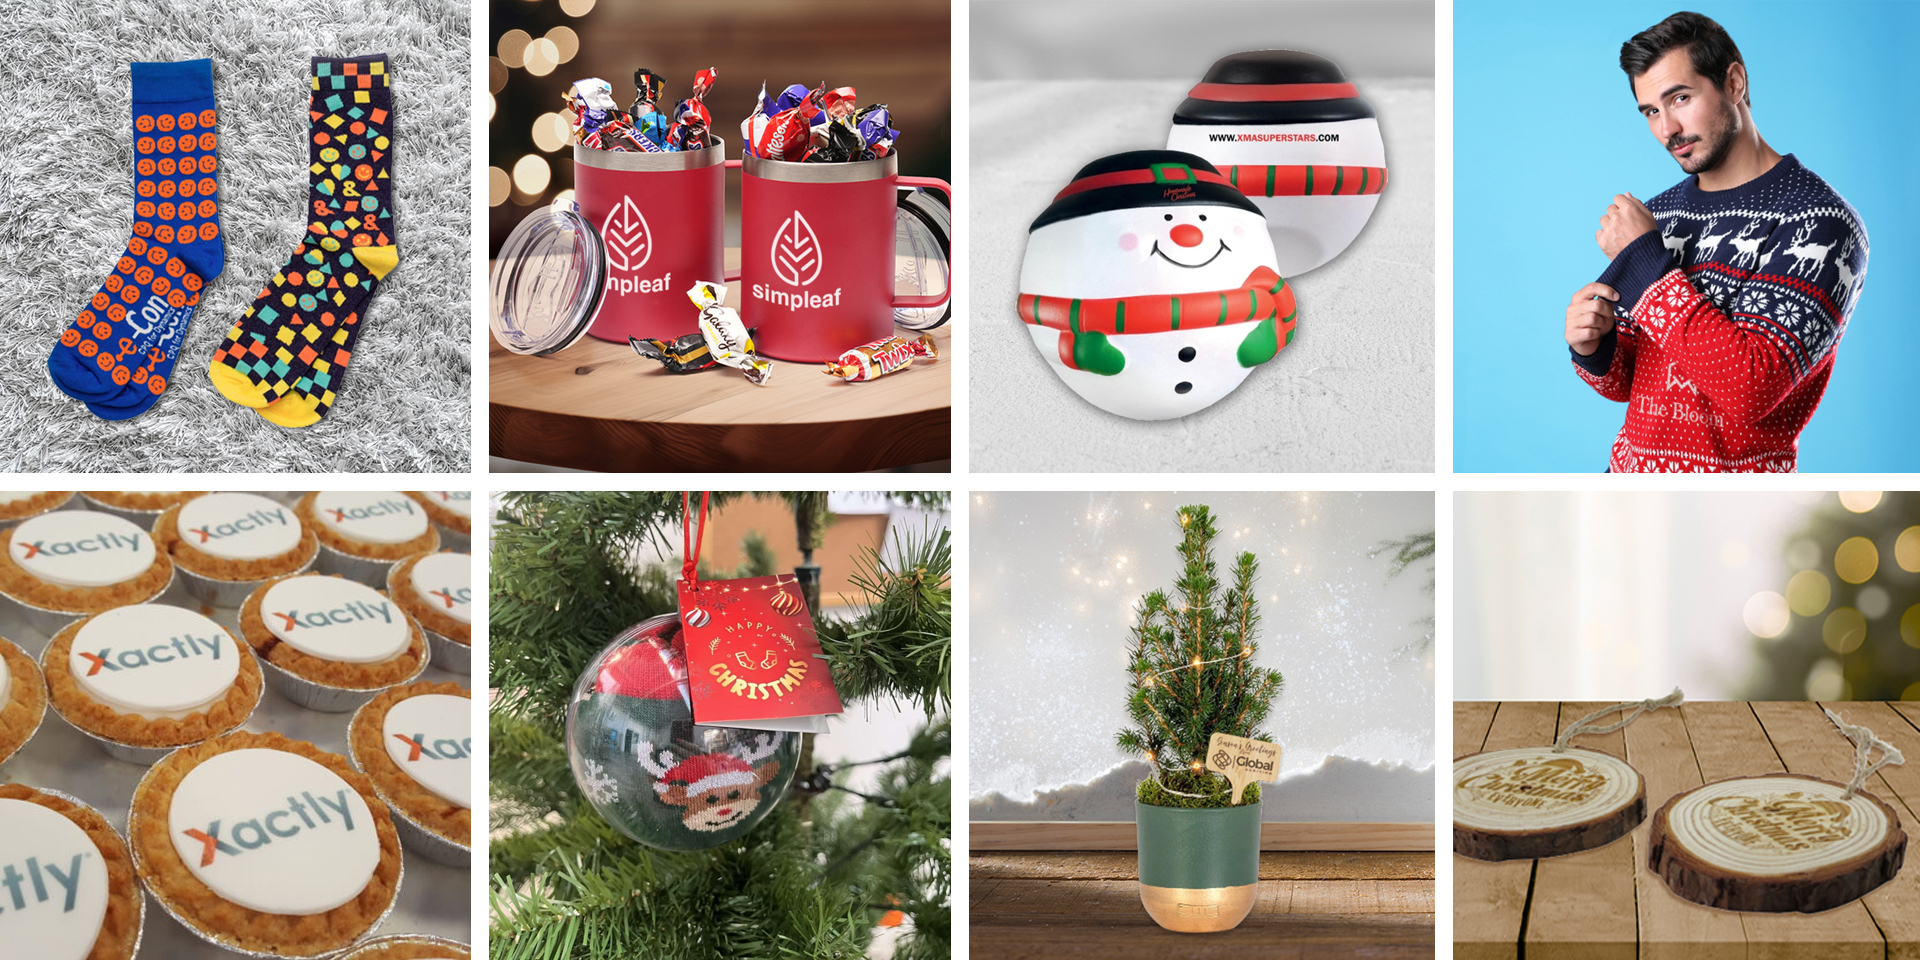 Unlock the Magic of Christmas with Promotional Christmas Product Ideas!